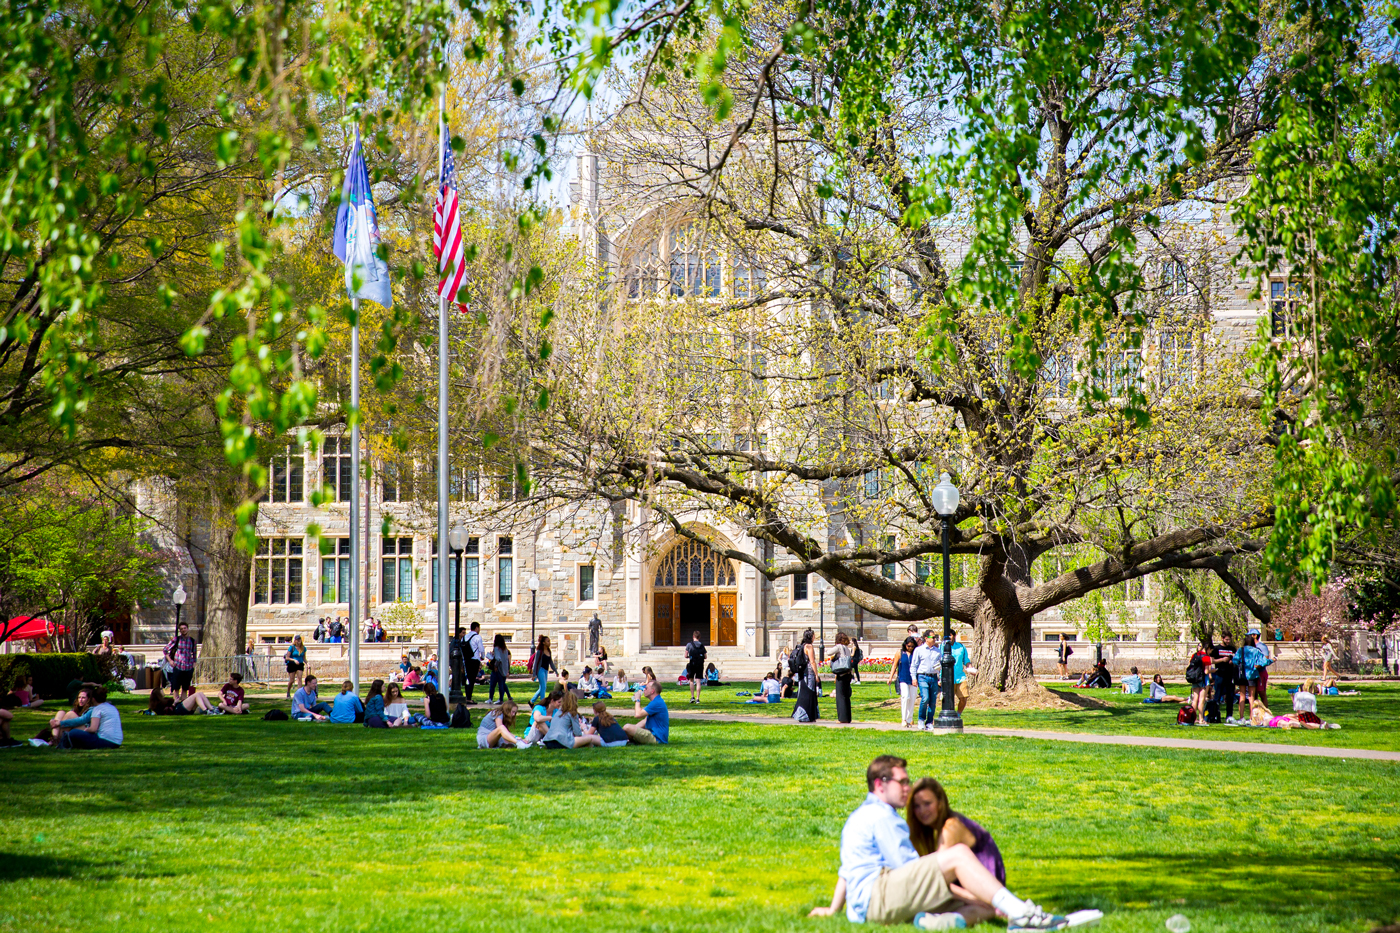 People enjoying a beautiful day on the lawn at the Georgetown University campus